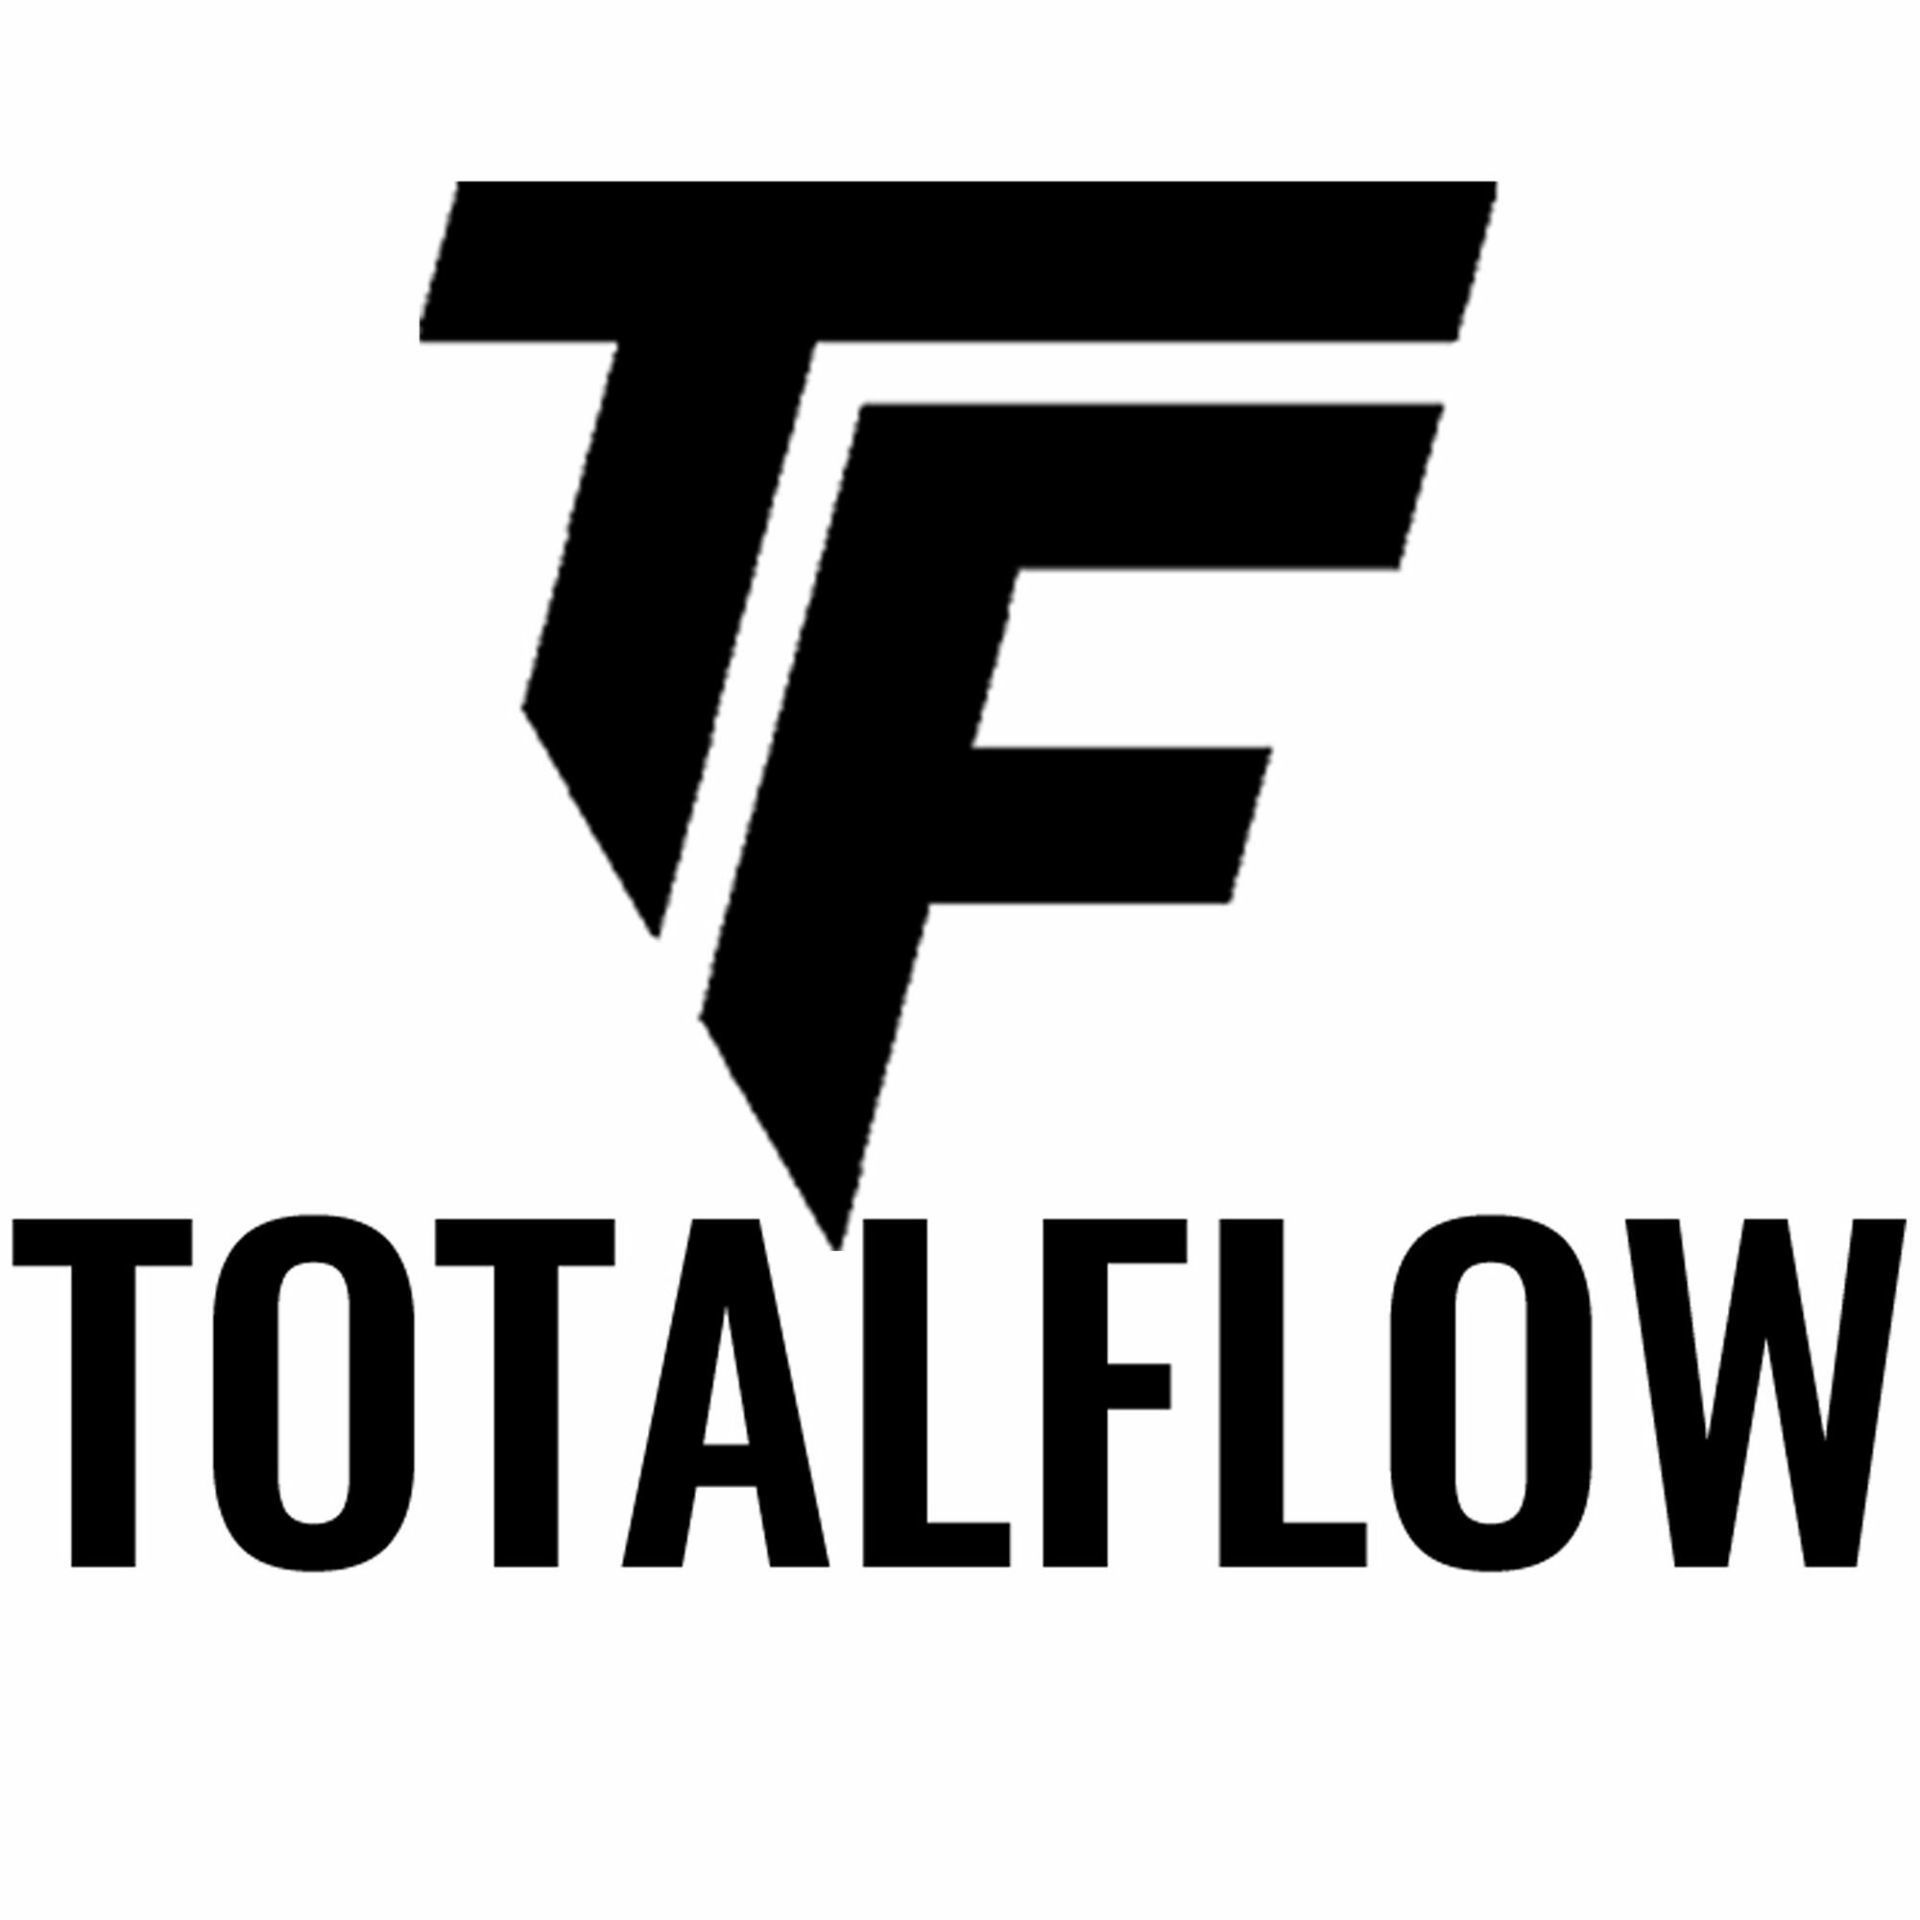 TOTALFLOW TF-N57250S Heavy Duty Double Braided Universal 2-1/4 inch Slotted Ends Exhaust Flex Pipe Connector | 2.25 inch ID